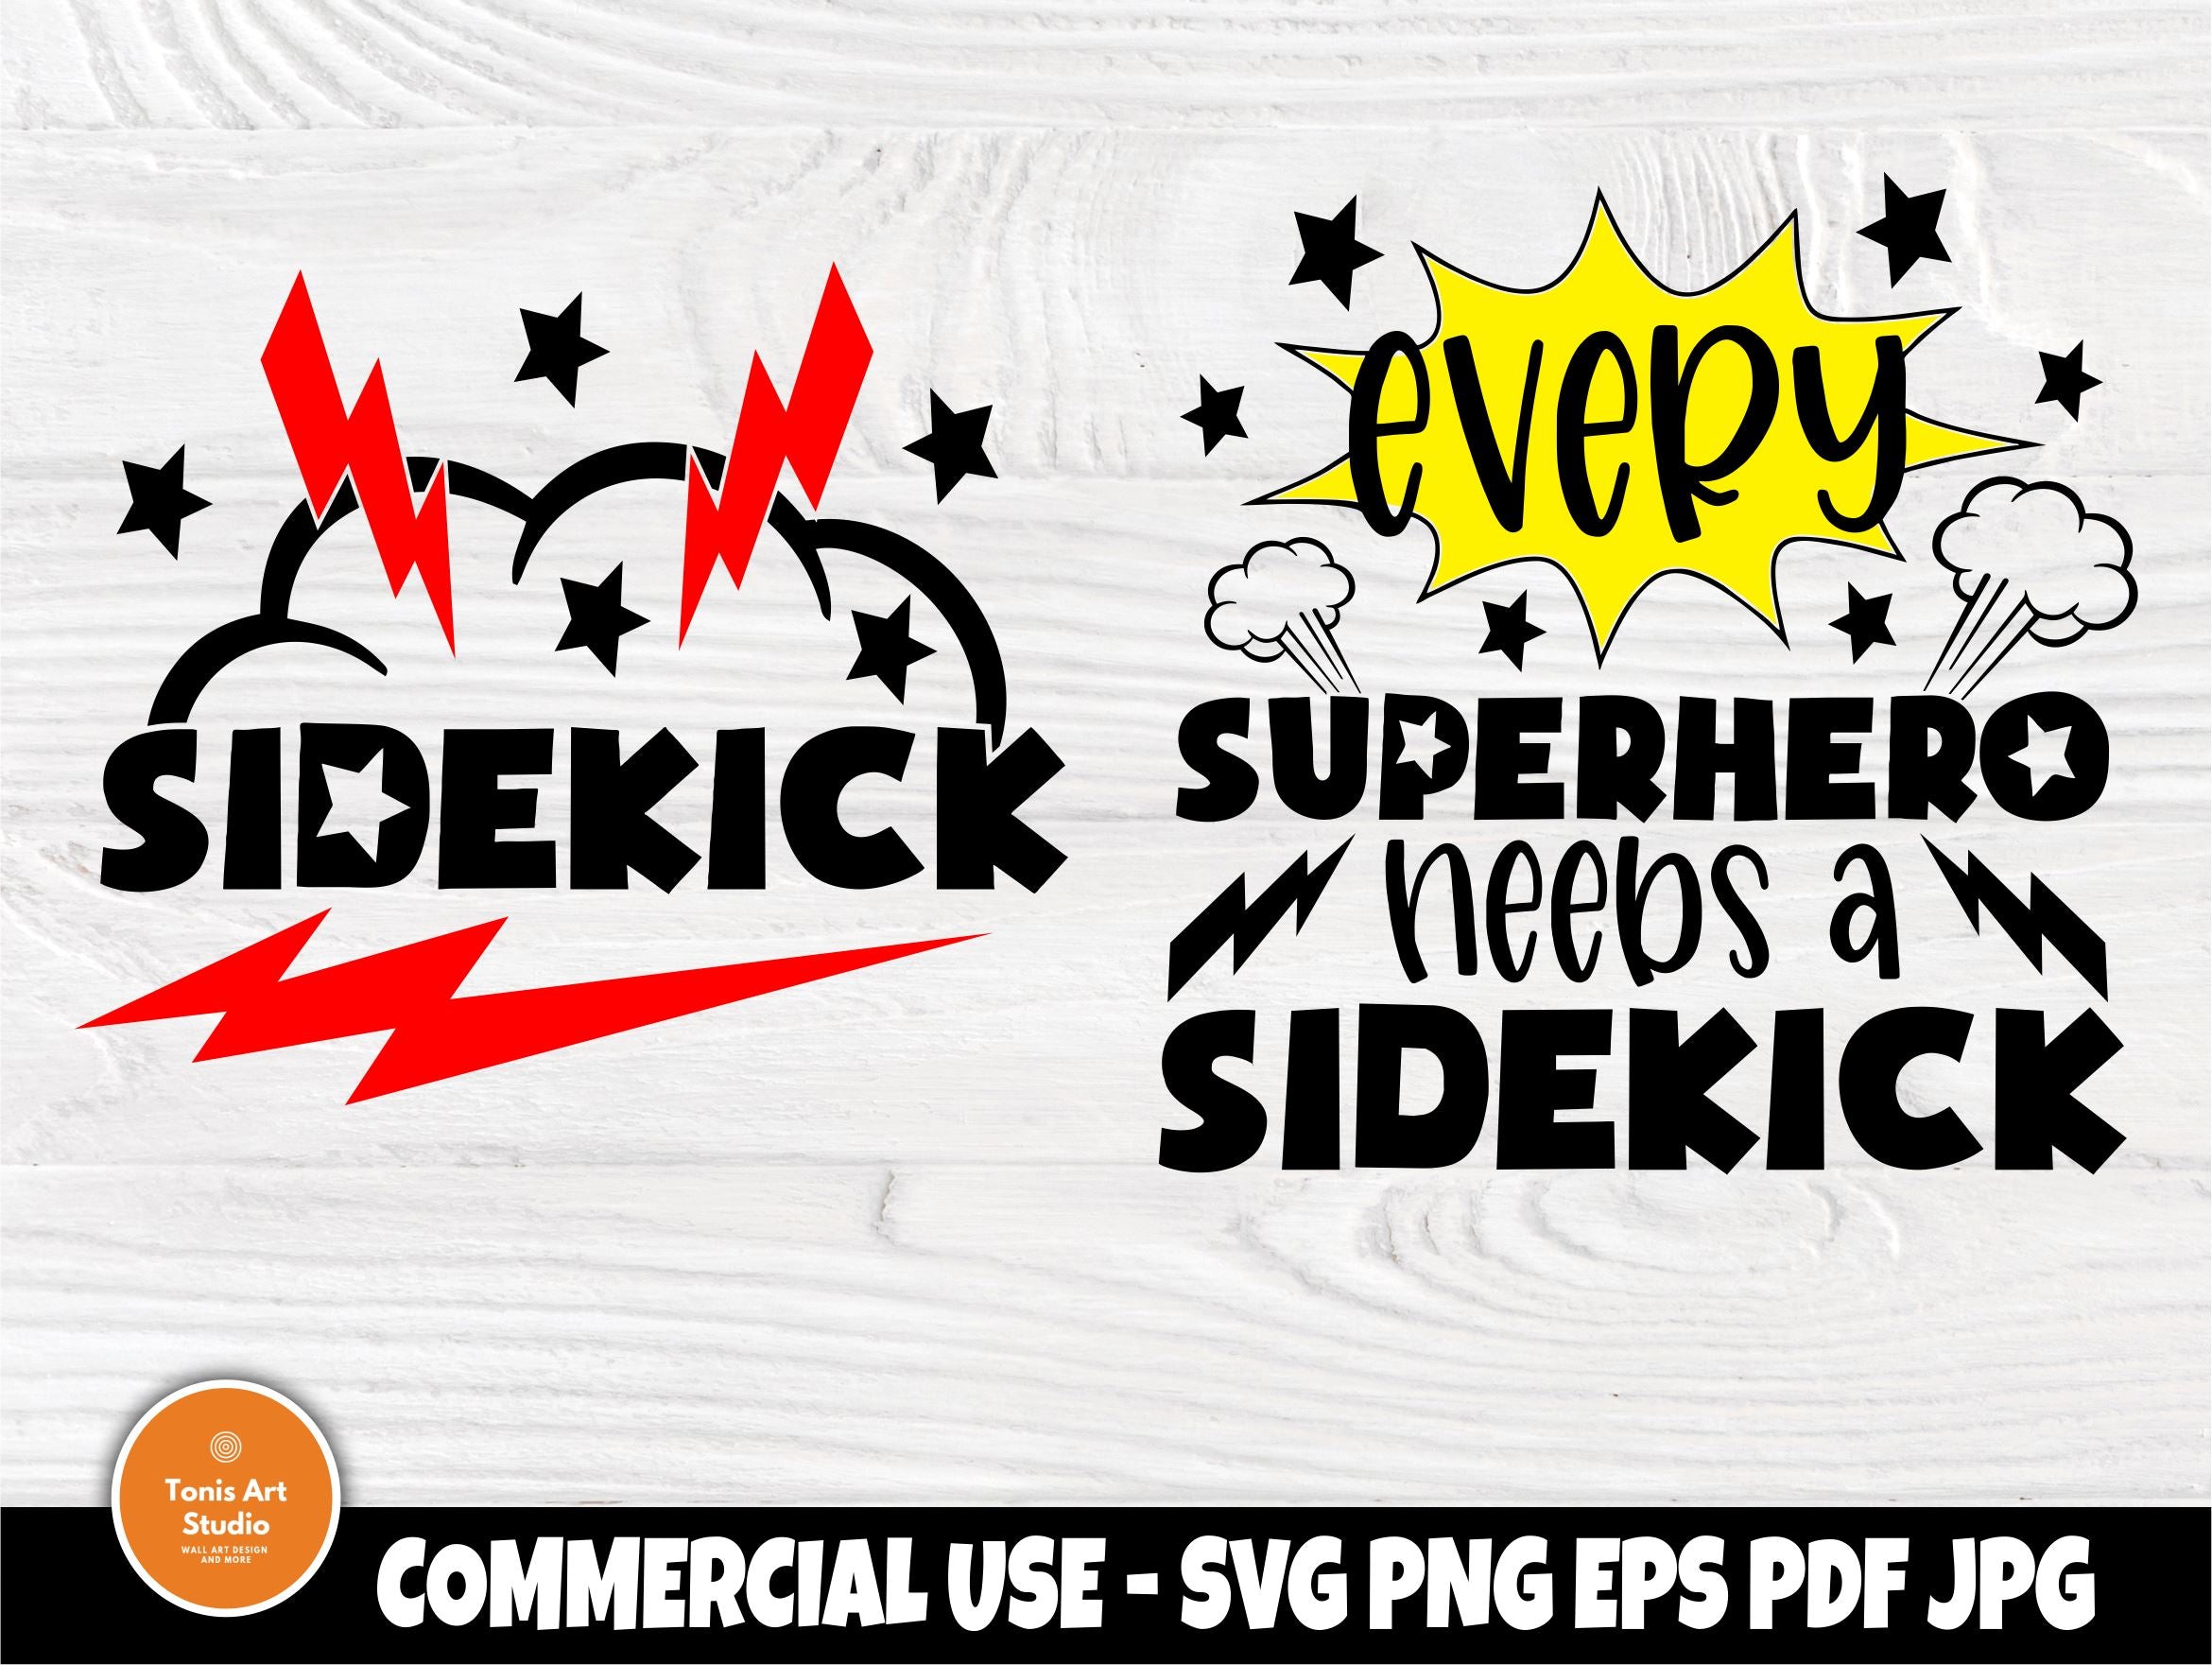 Download Every Superhero Needs A Sidekick Svg Png Eps Pdf Jpg Cut File Daddy And Son Svg Baby Boy Svg Superhero Svg Cameo Cricut Baby Onesie Svg So Fontsy